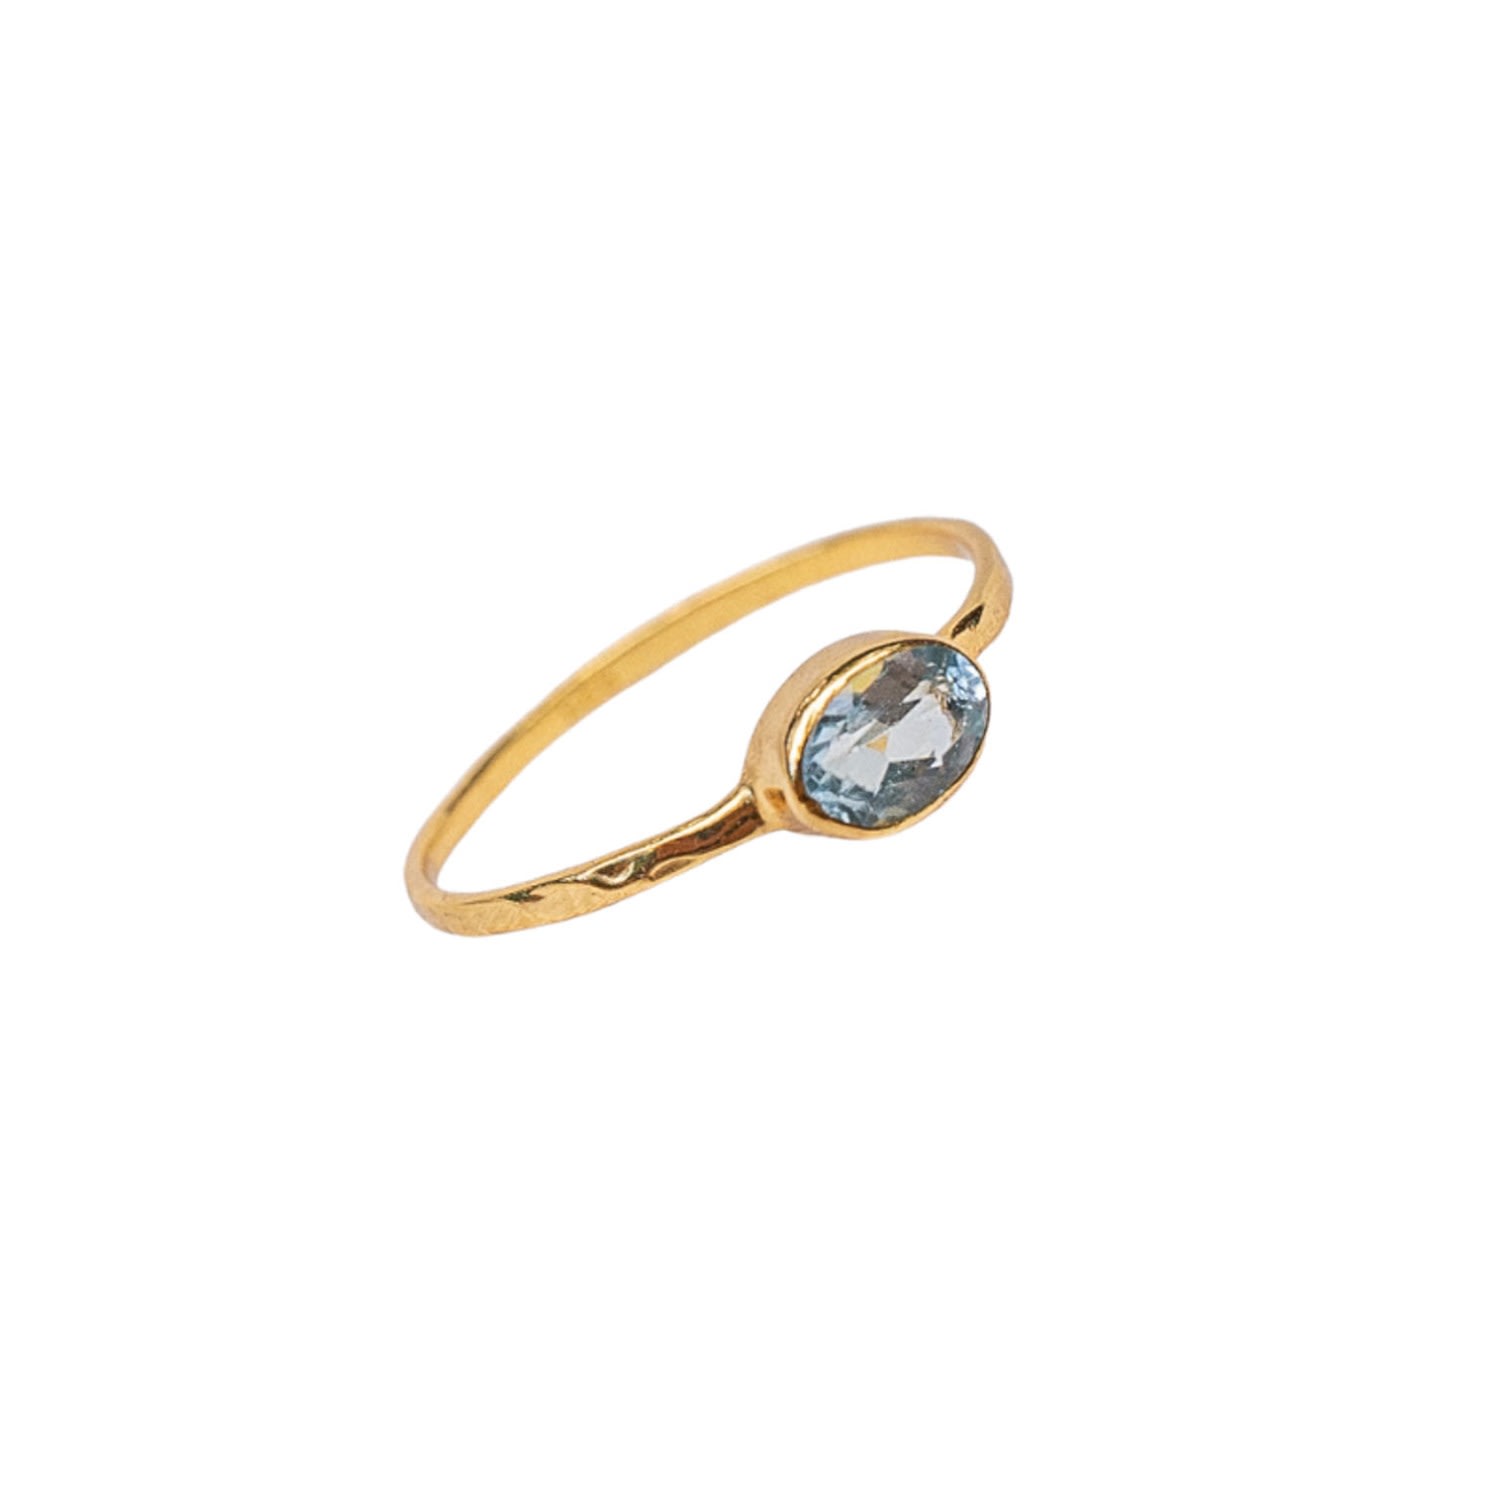 Women’s Gold / Blue Delicate Hammered Gold Vermeil Berawa Ring - Blue Topaz Cantik by Camilla